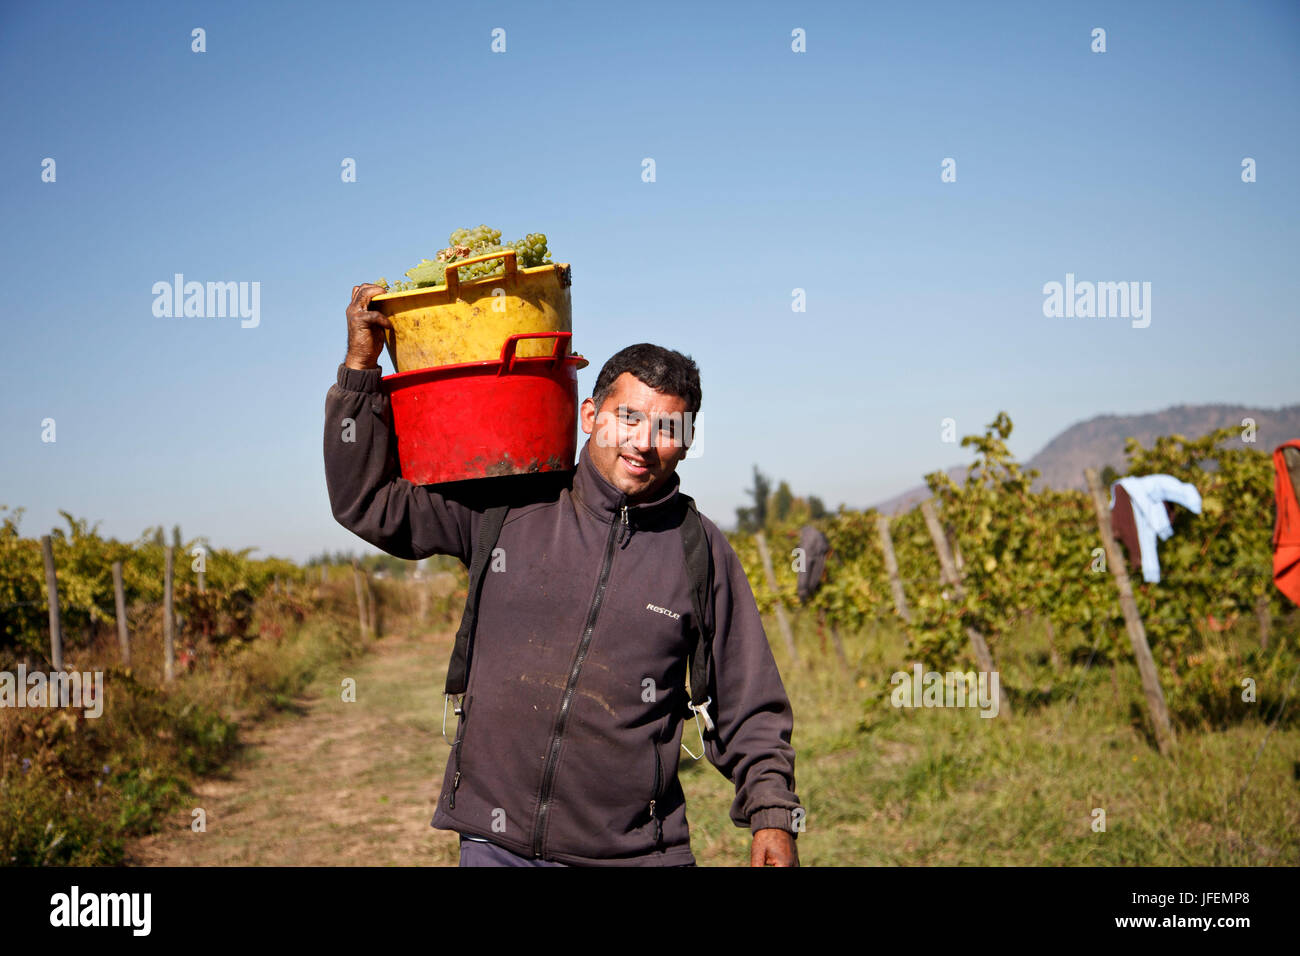 Chile, Valle de Curico, Fairly Trade, wine, vintage, harvest assistant, Stock Photo